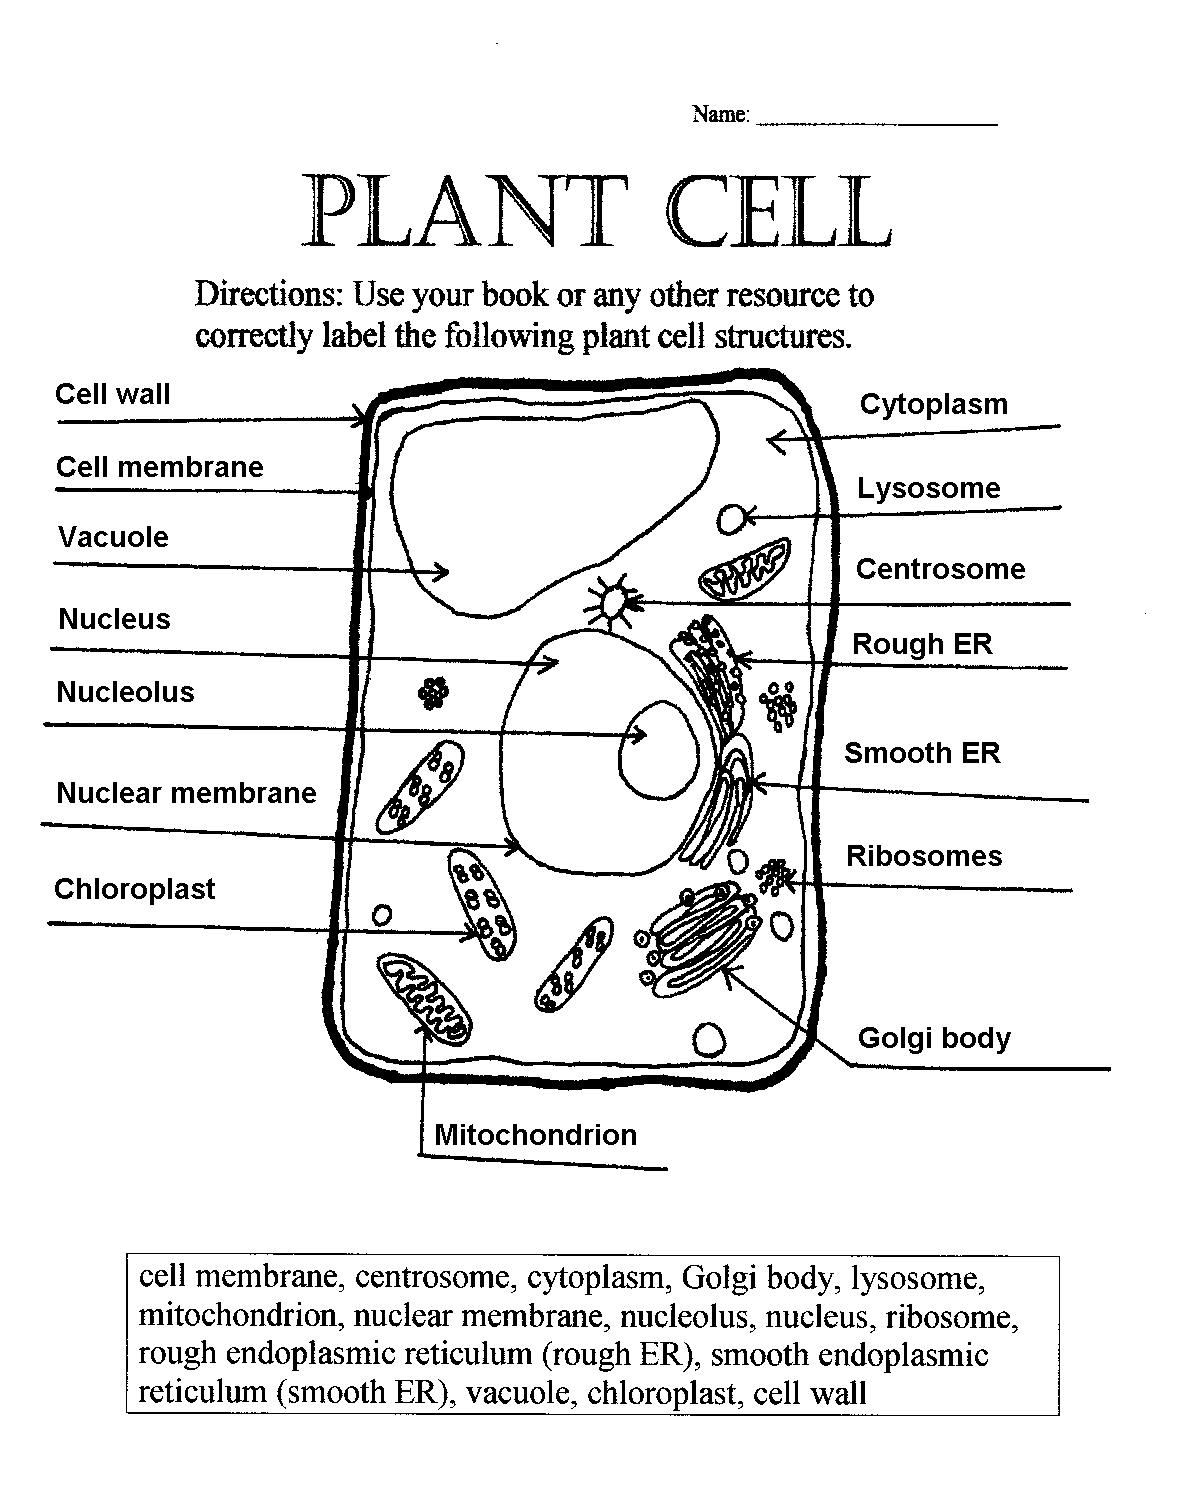 label-plant-cell-worksheet-1-biological-science-picture-directory-pulpbits